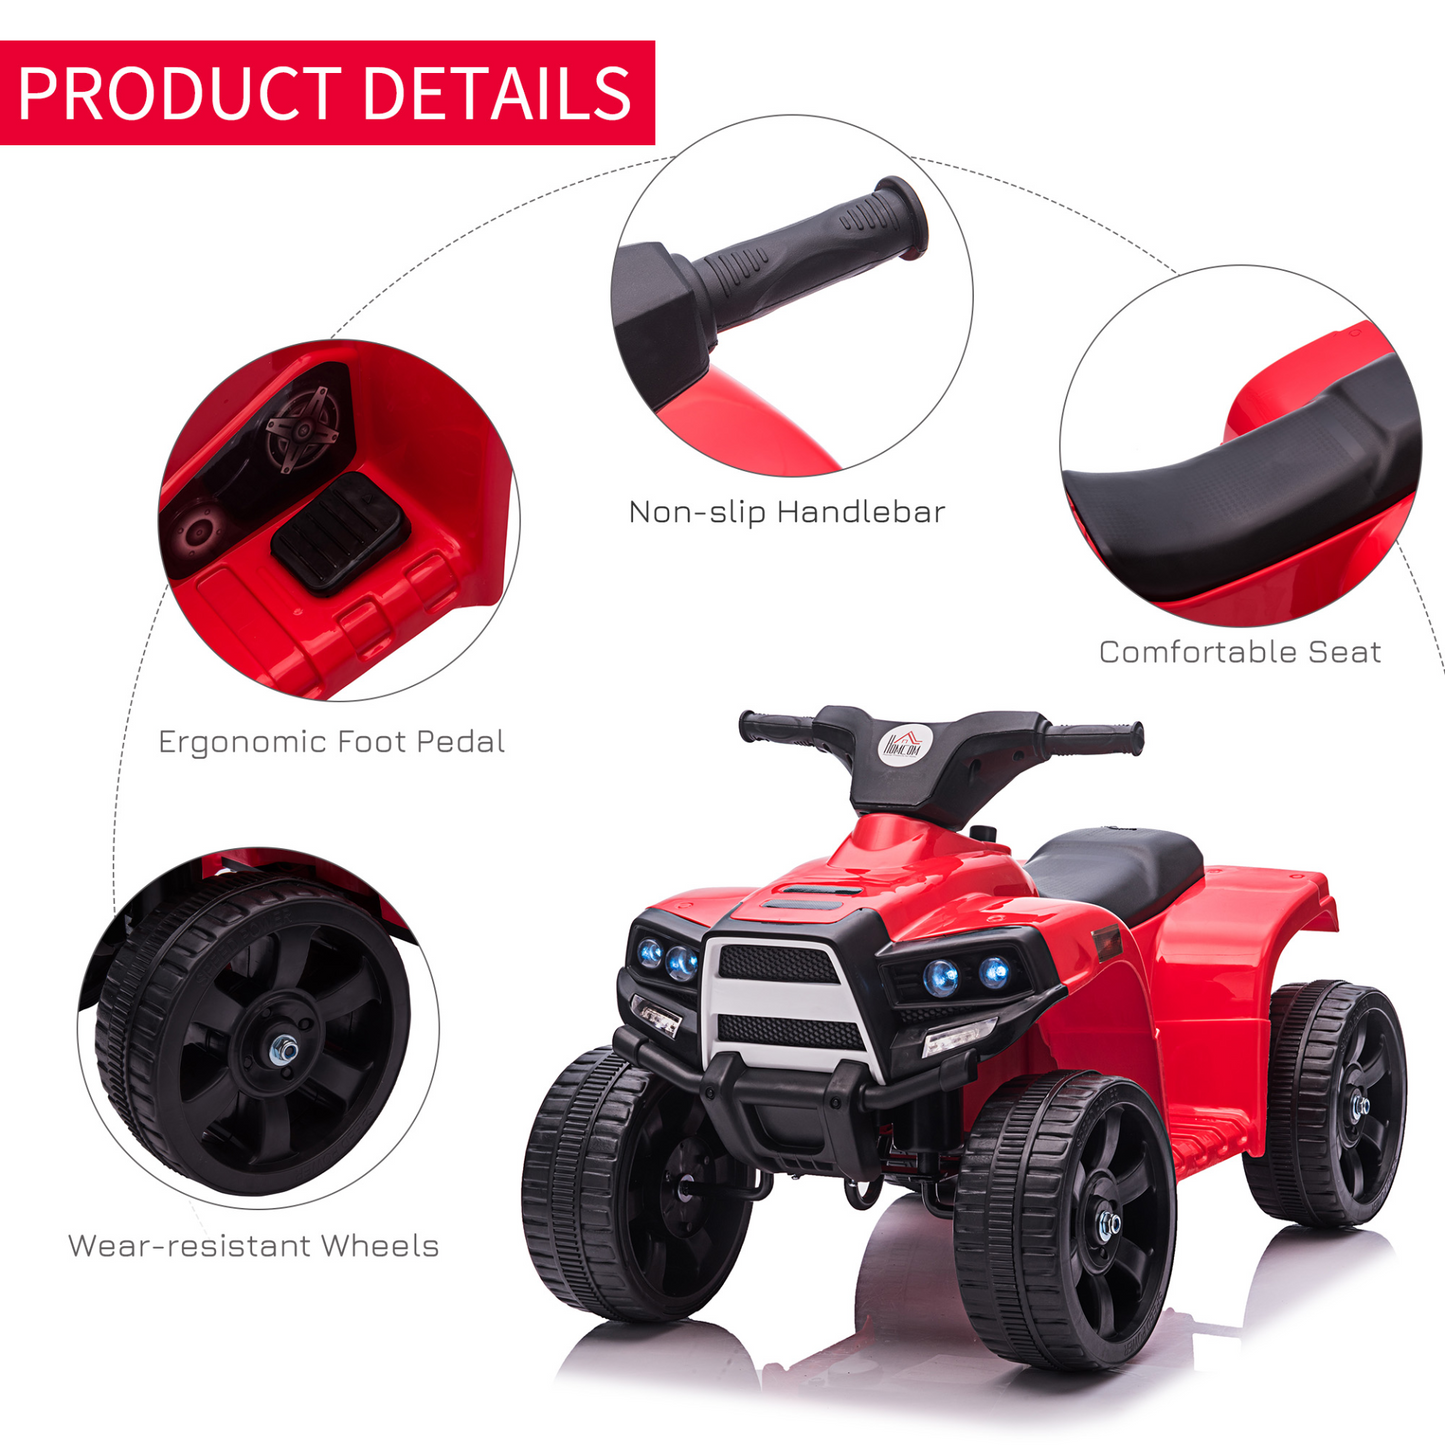 HOMCOM 6V Kids Electric Ride on Car ATV Toy Quad Bike With Headlights for Toddlers 18-36 months Red